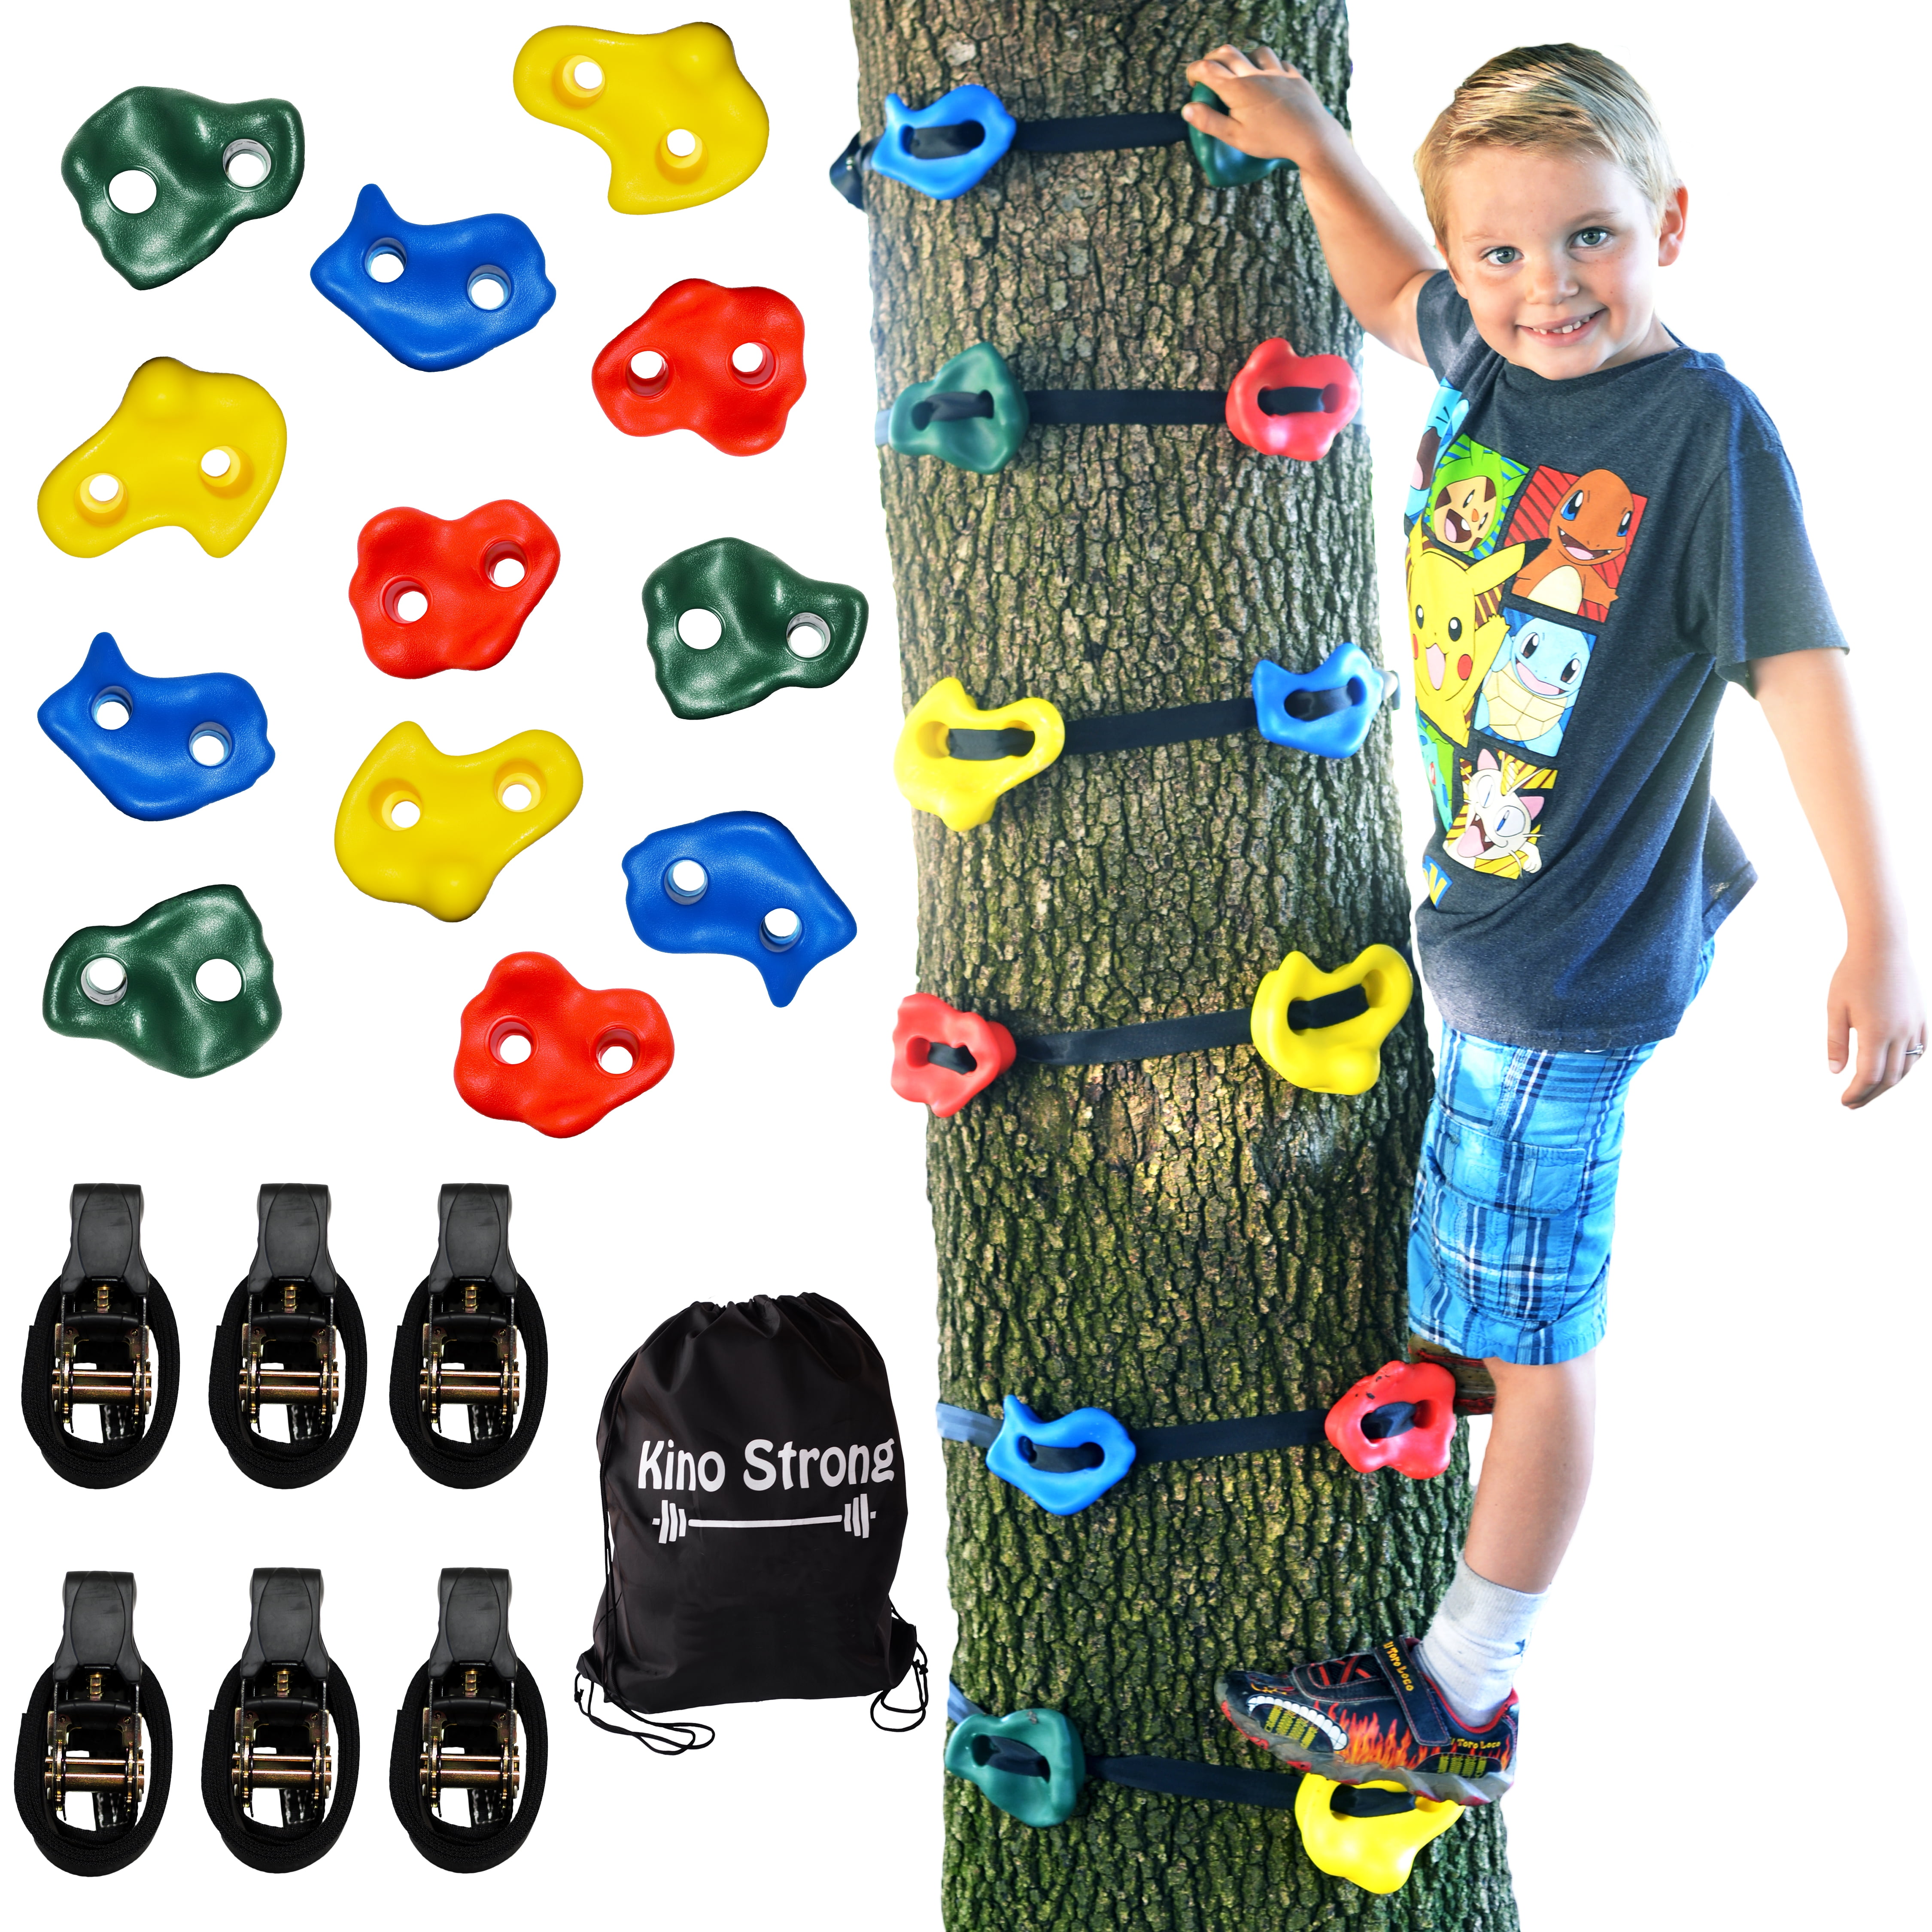 SEAAN Rock Climbing Tree Climbing Suit 15 Tree Climbing Holds and 6 Ratchet Straps for Kids Adult Climbing Rocks for Warrior Obstacle Course Training 